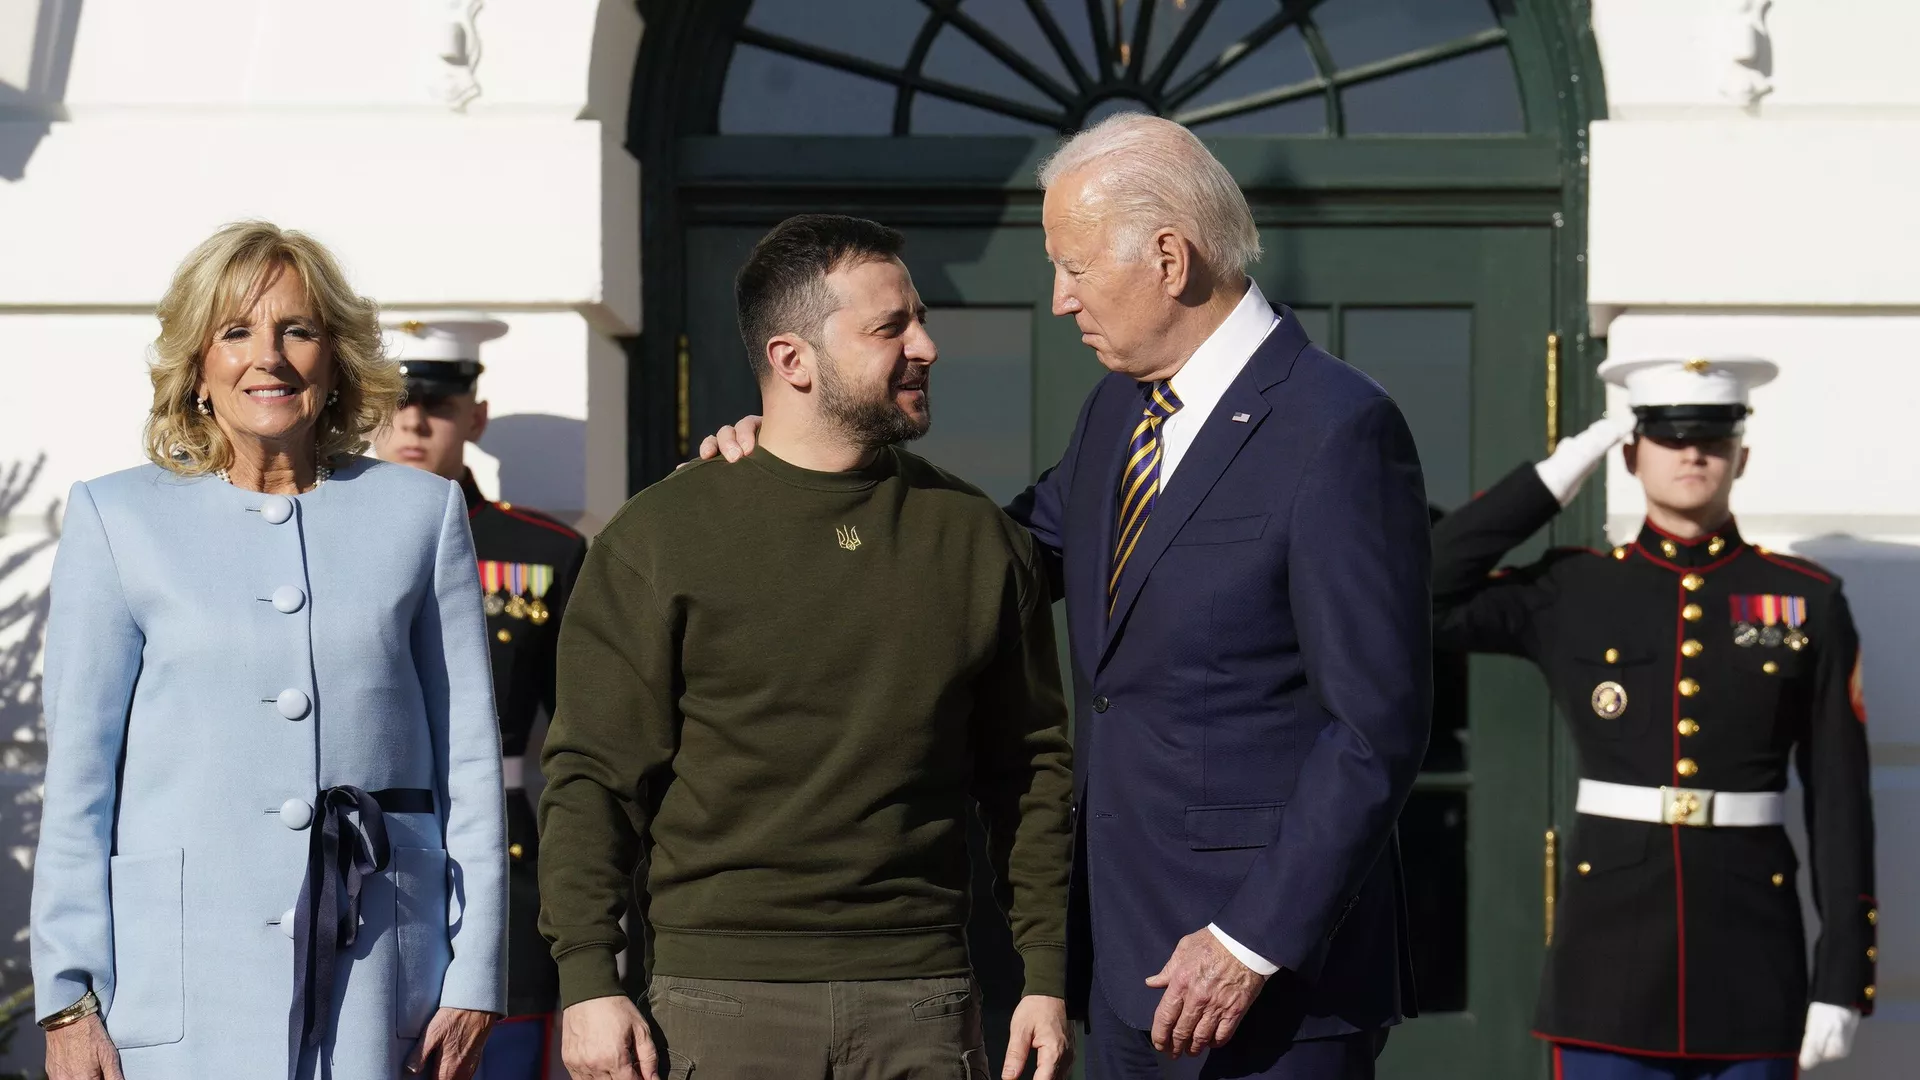 Biden: US Cannot ‘Under Any Circumstances’ Allow Support for Ukraine Be Interrupted